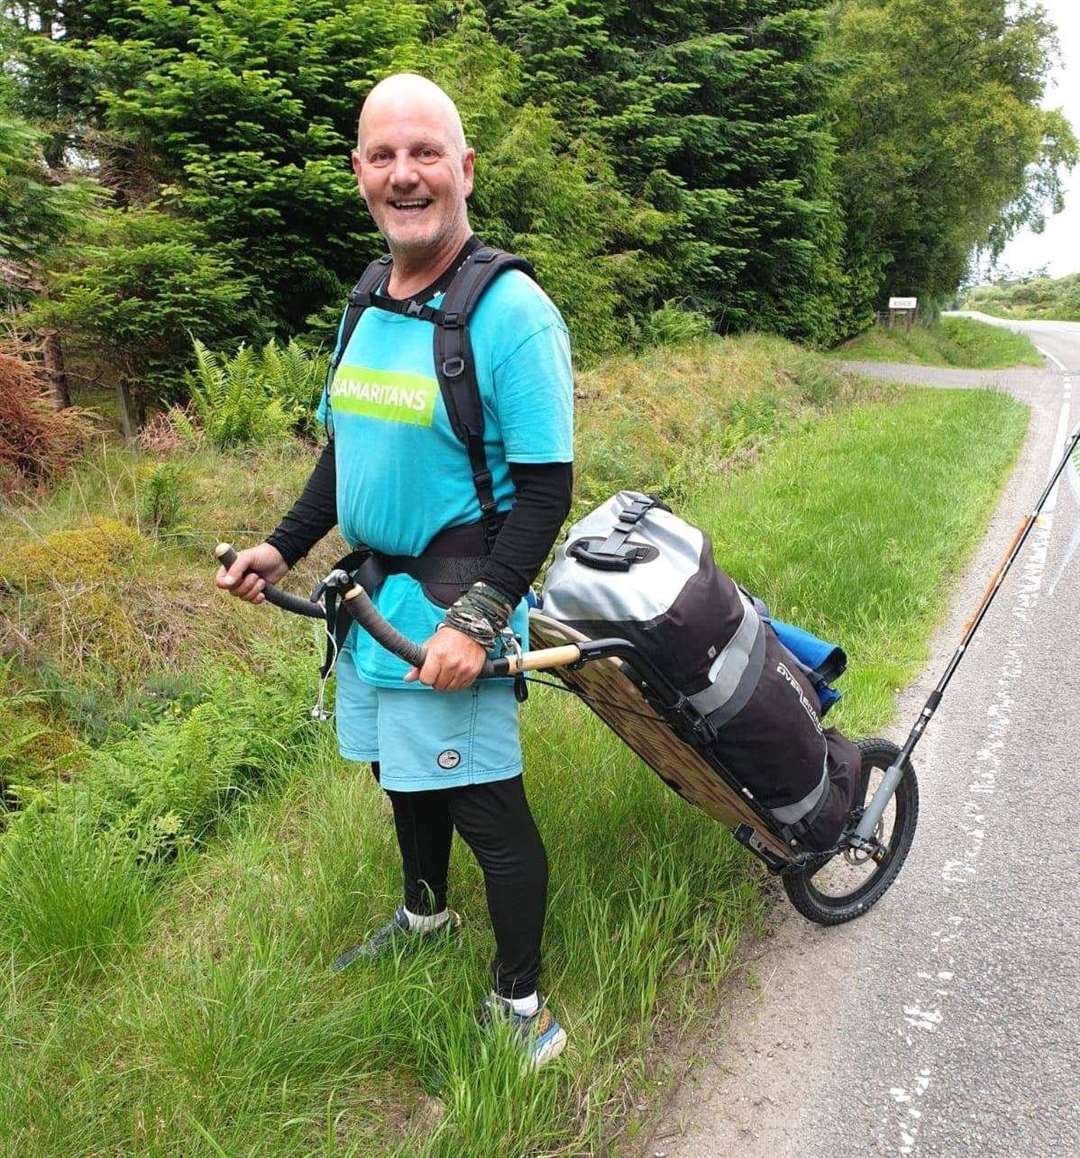 Dave Matthews, from the Doncaster branch of Samaritans, is walking 6000 miles over a two-year period and arrived in Thurso last week.